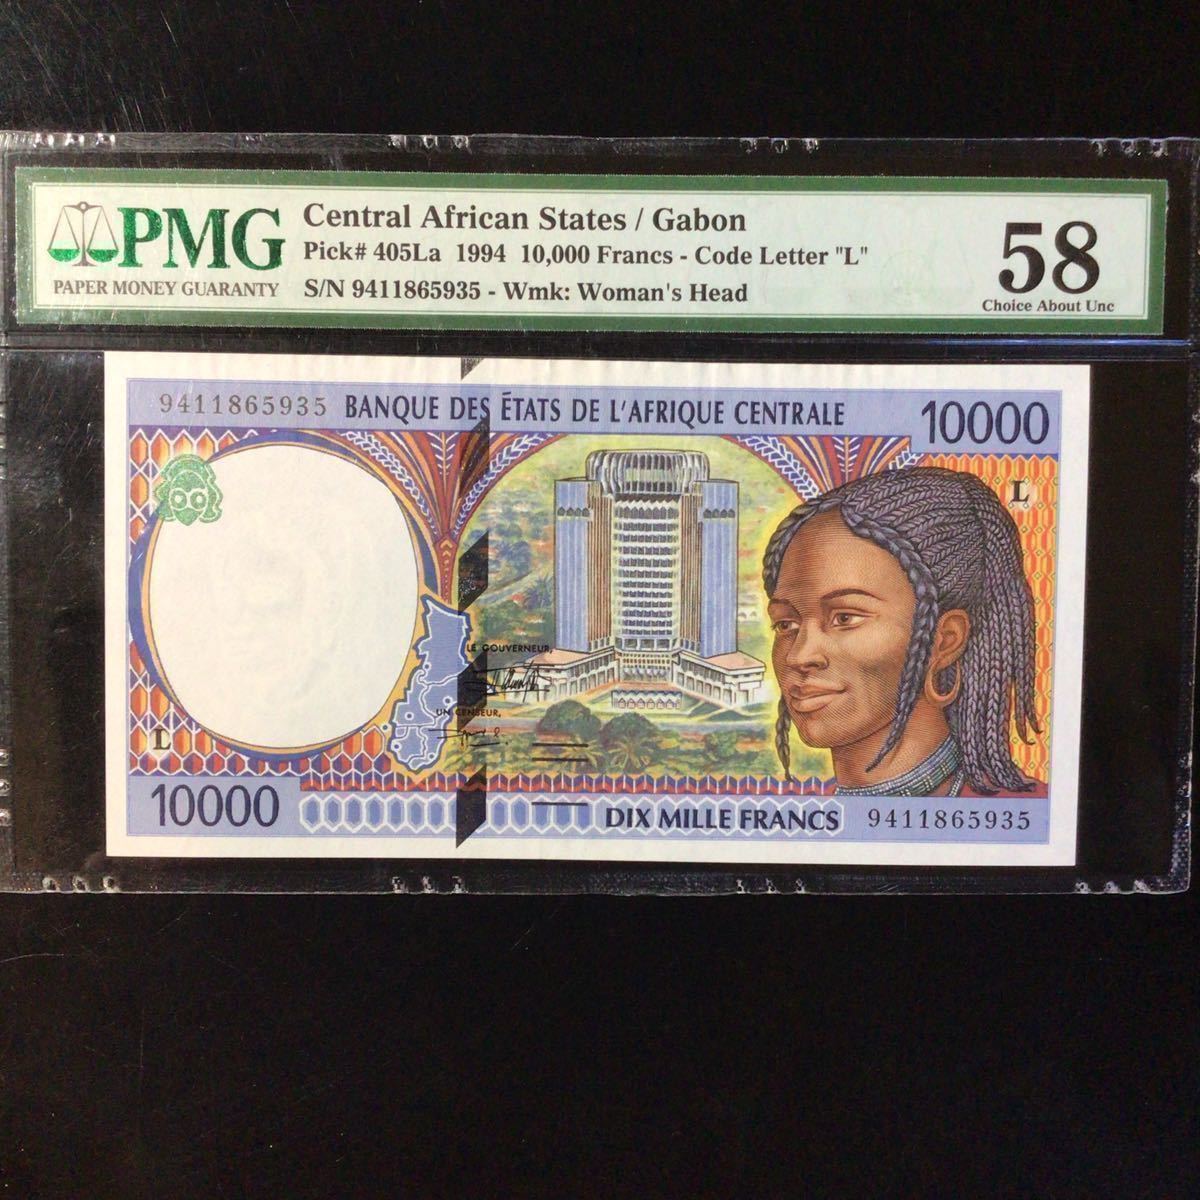 World Banknote Grading CENTRAL AFRICAN STATES《GABON》 10000 Francs【1994】『PMG Grading Choice About Unc 58』